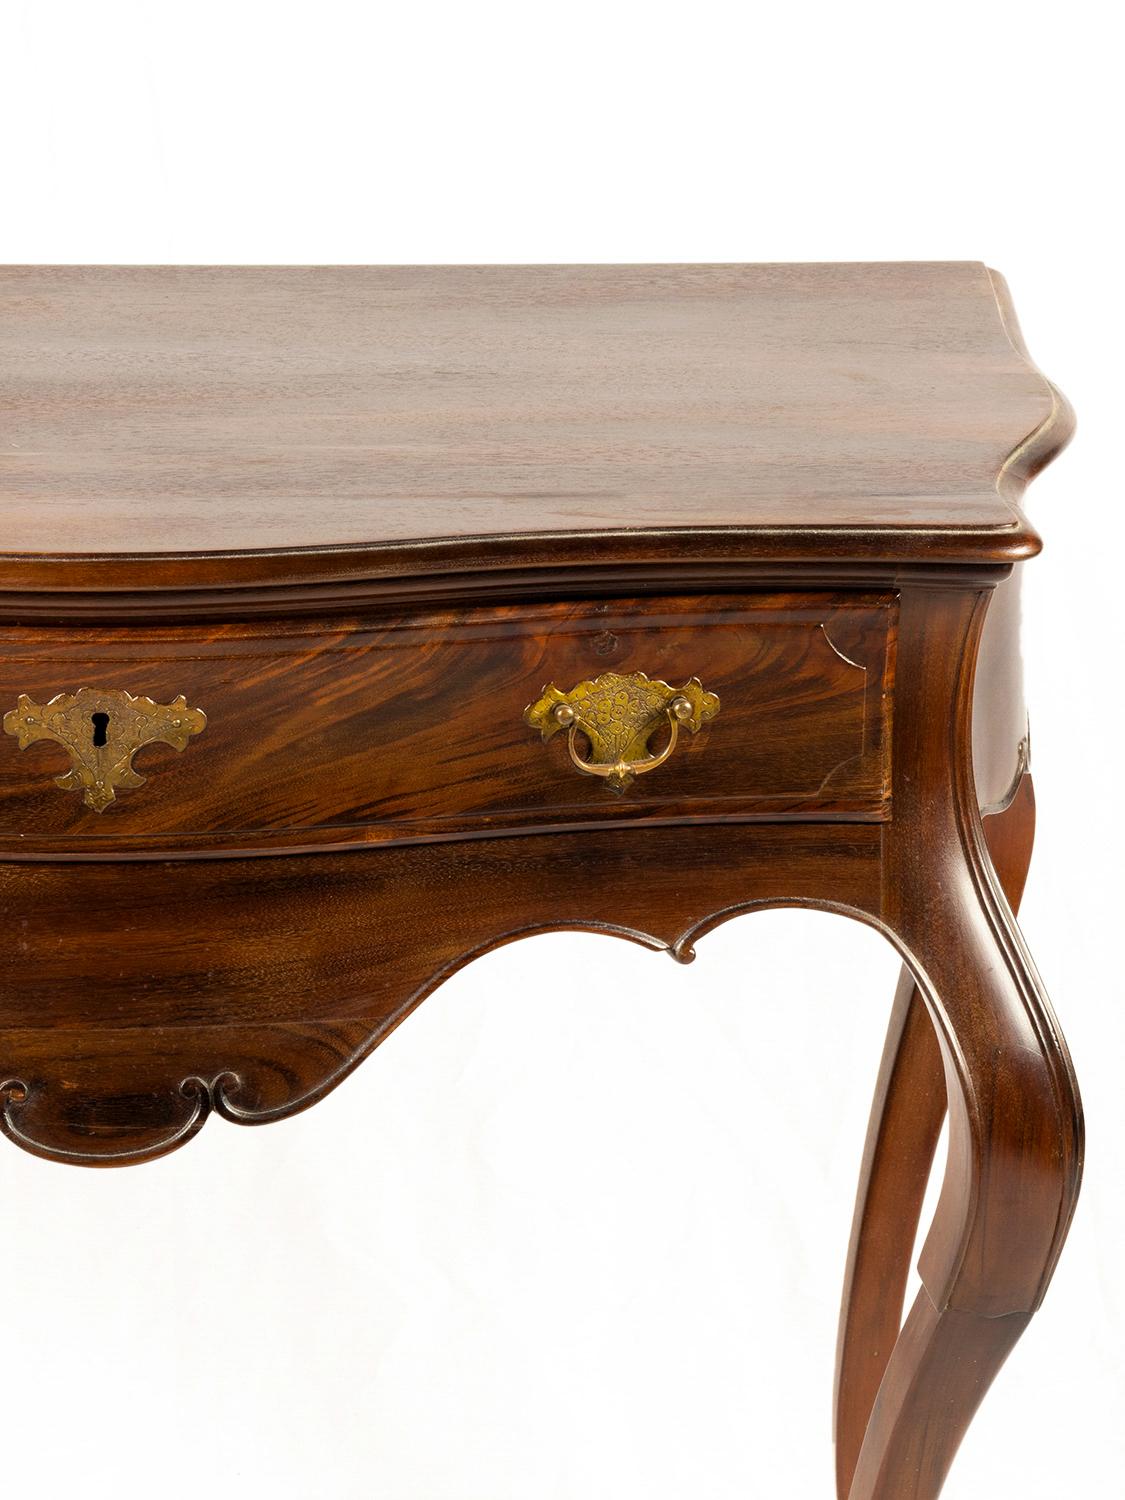 Wood Portuguese Baroque Styled Commode, 19th Century For Sale